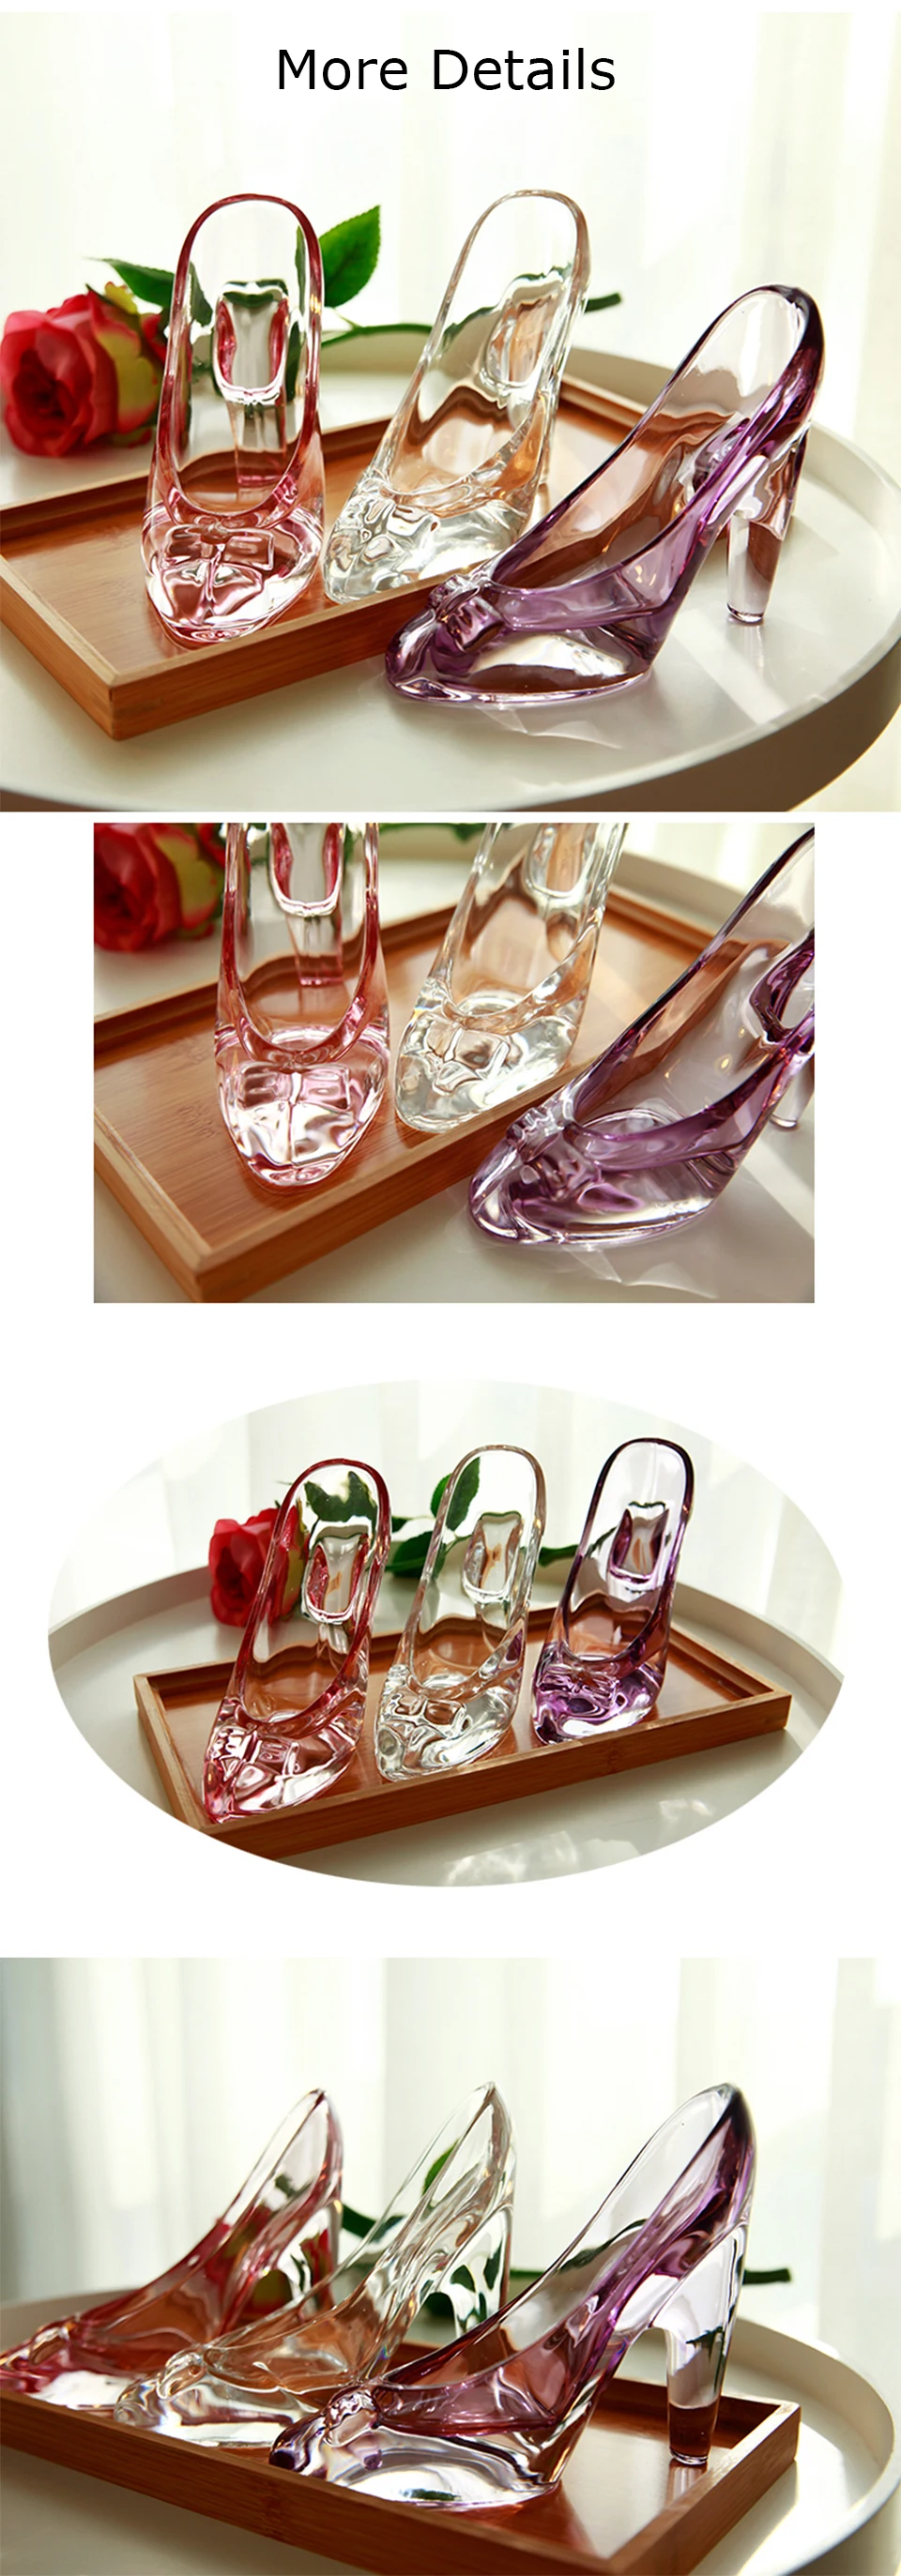 Sodial Crystal Shoes Glass Birthday Gift Home Decor Cinderella High-heeled Shoes Wedding Shoes Figurines Miniatures Ornament